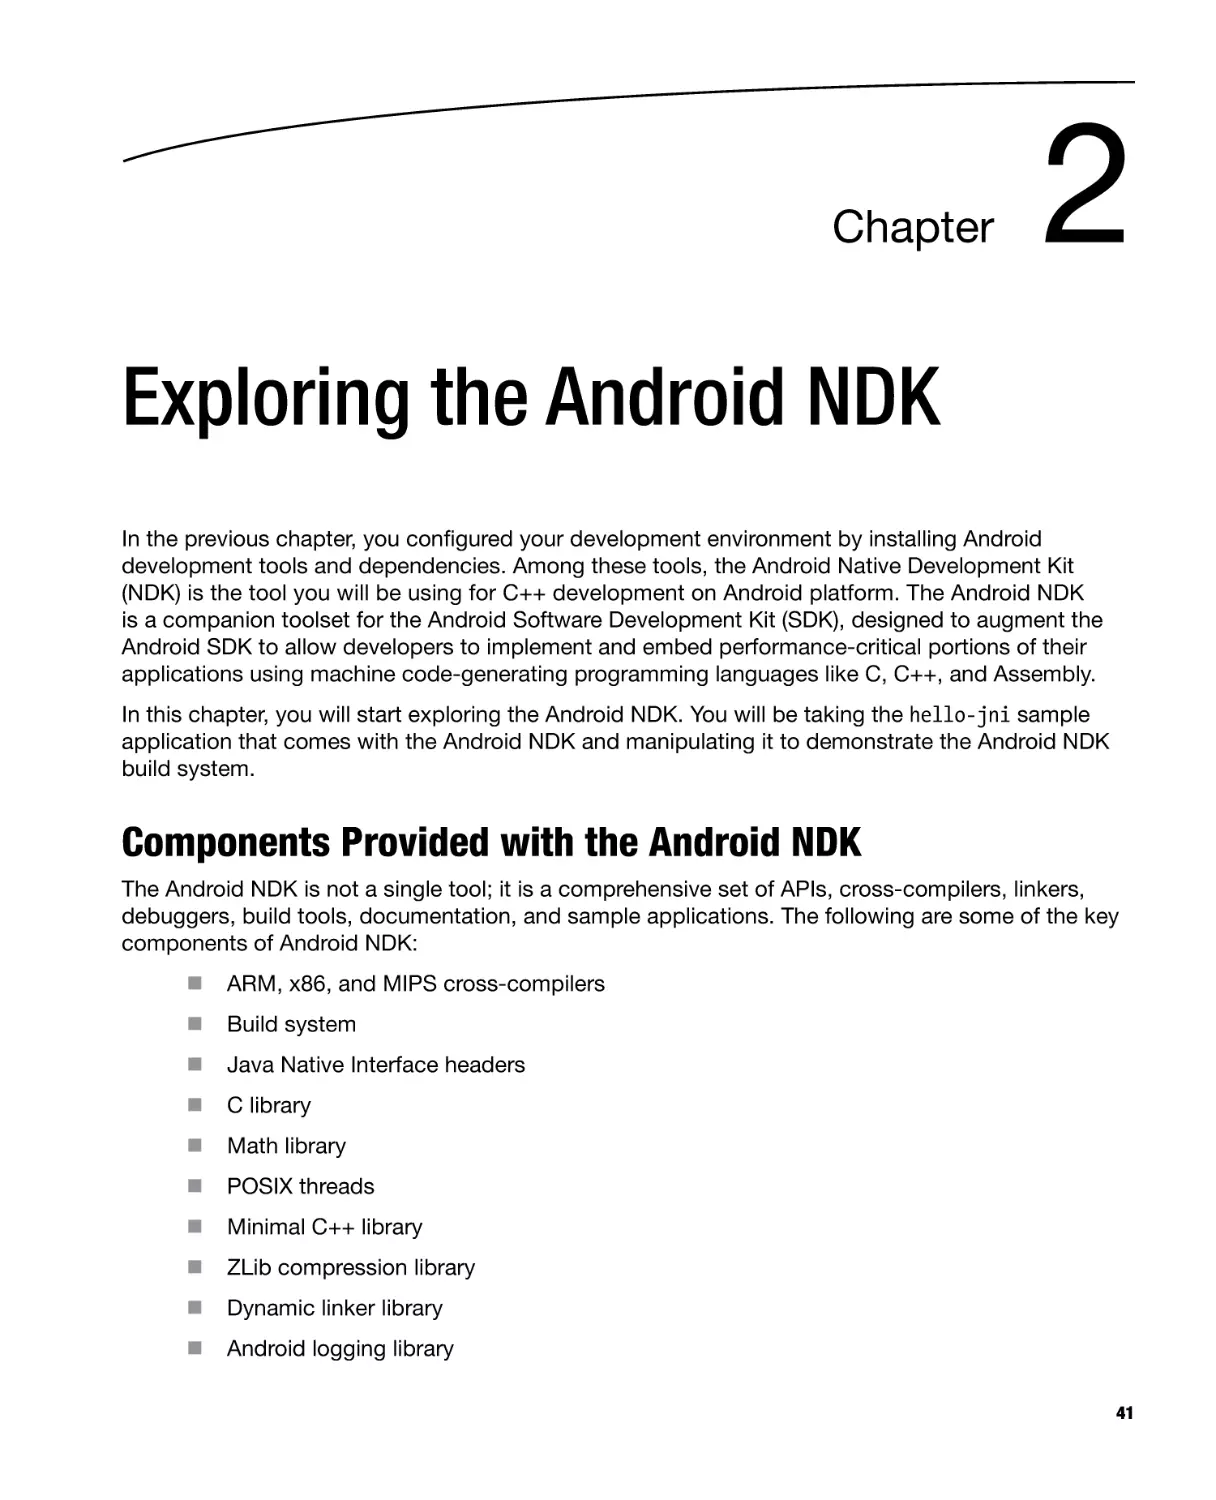 Chapter 2
Components Provided with the Android NDK